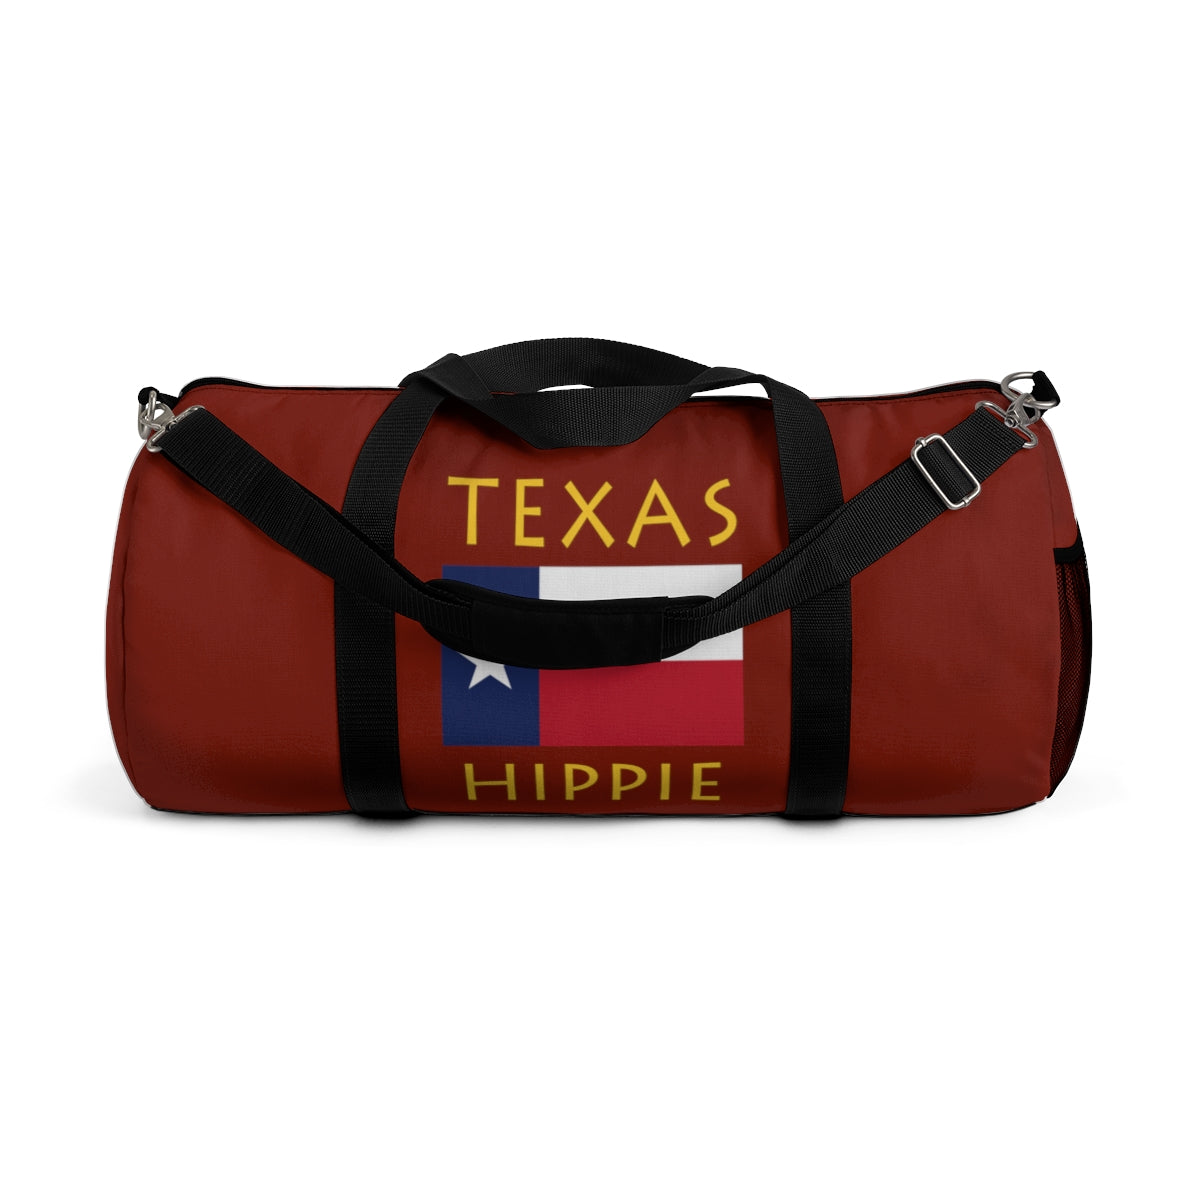 Stately Wear's Texas Flag Hippie duffel bag is colorful, iconic and stylish. We are a Katie Couric Shop partner. This duffel bag is the perfect accessory as a beach bag, ski bag, travel bag, shopping bag & gym bag, Pilates bag or yoga bag. Custom made one-at-a-time with environmentally friendly biodegradable inks & dyes. 2 sizes to choose. Stately Wear's bags are very durable, soft and colorful duffels with durable straps.